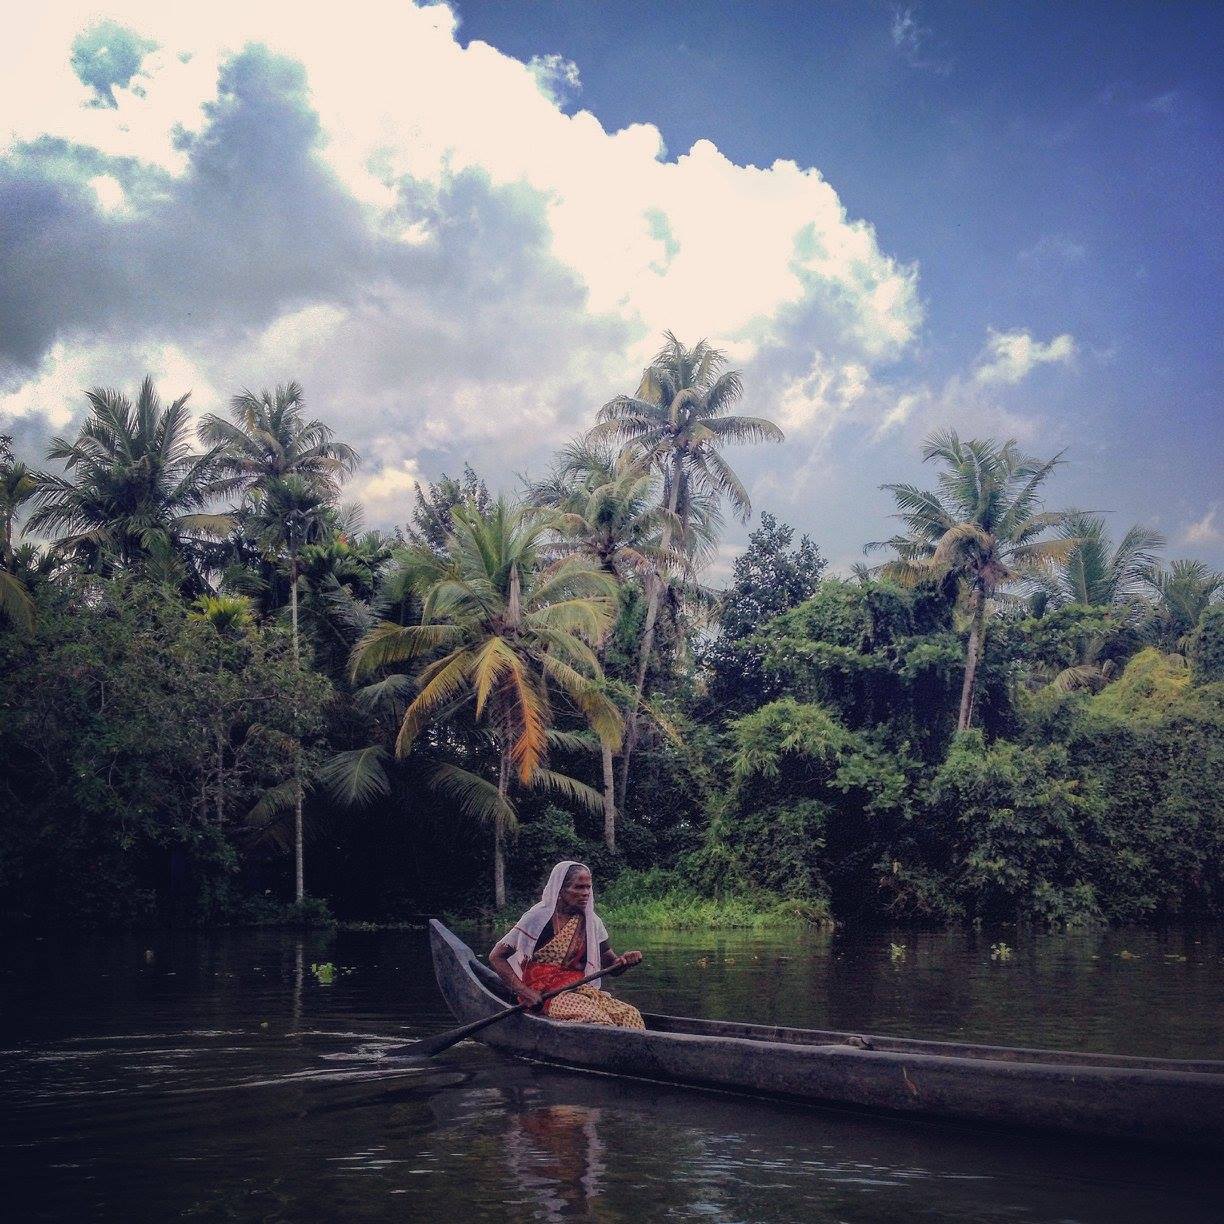 lady in sari rowing wooden boat on river kerala india